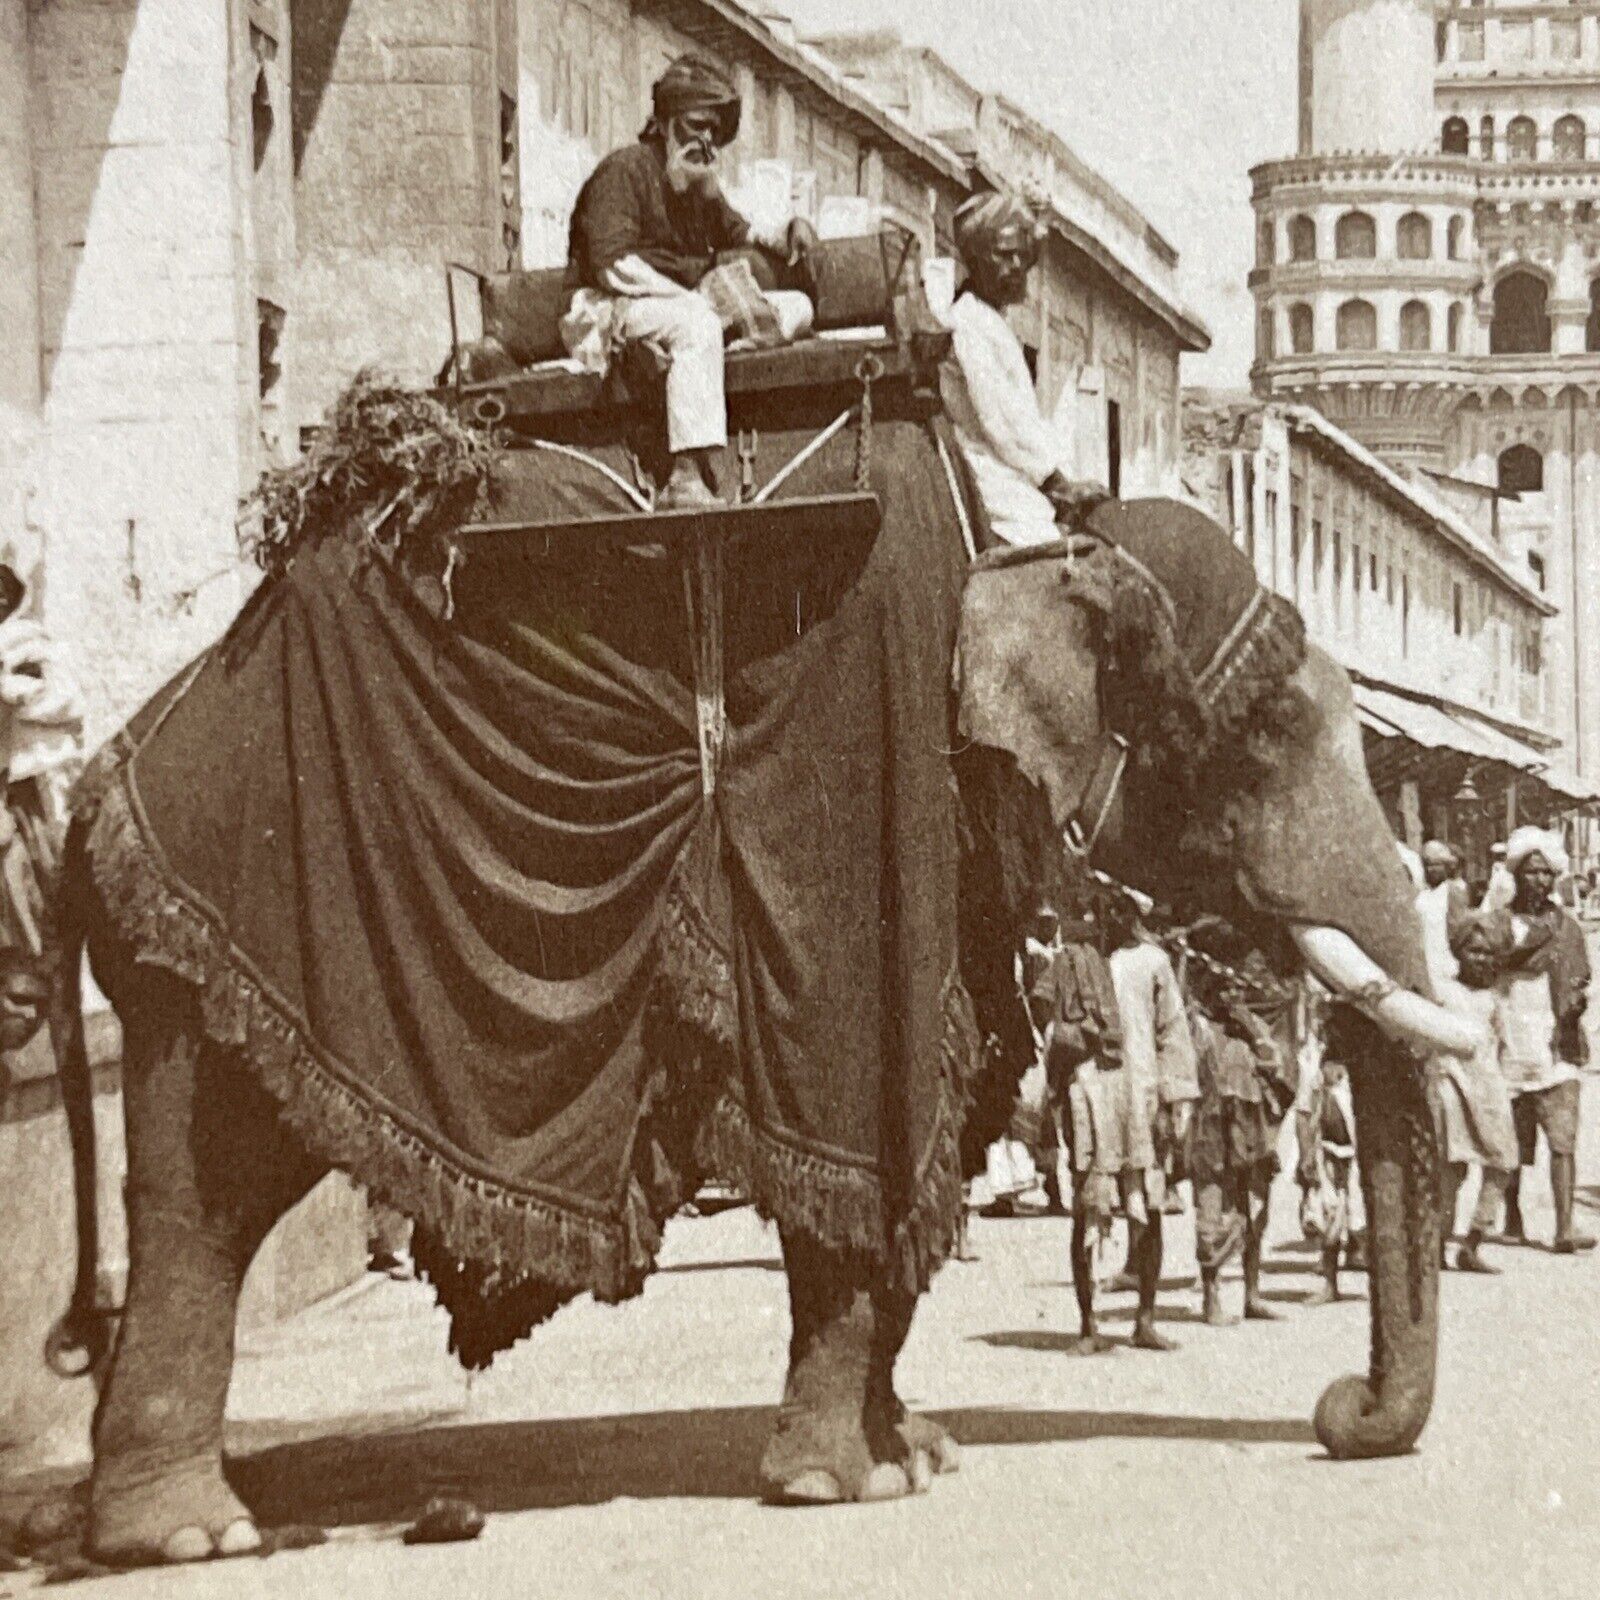 Antique 1903 Man Riding A Huge Elephant In India Stereoview Photo Card P5650